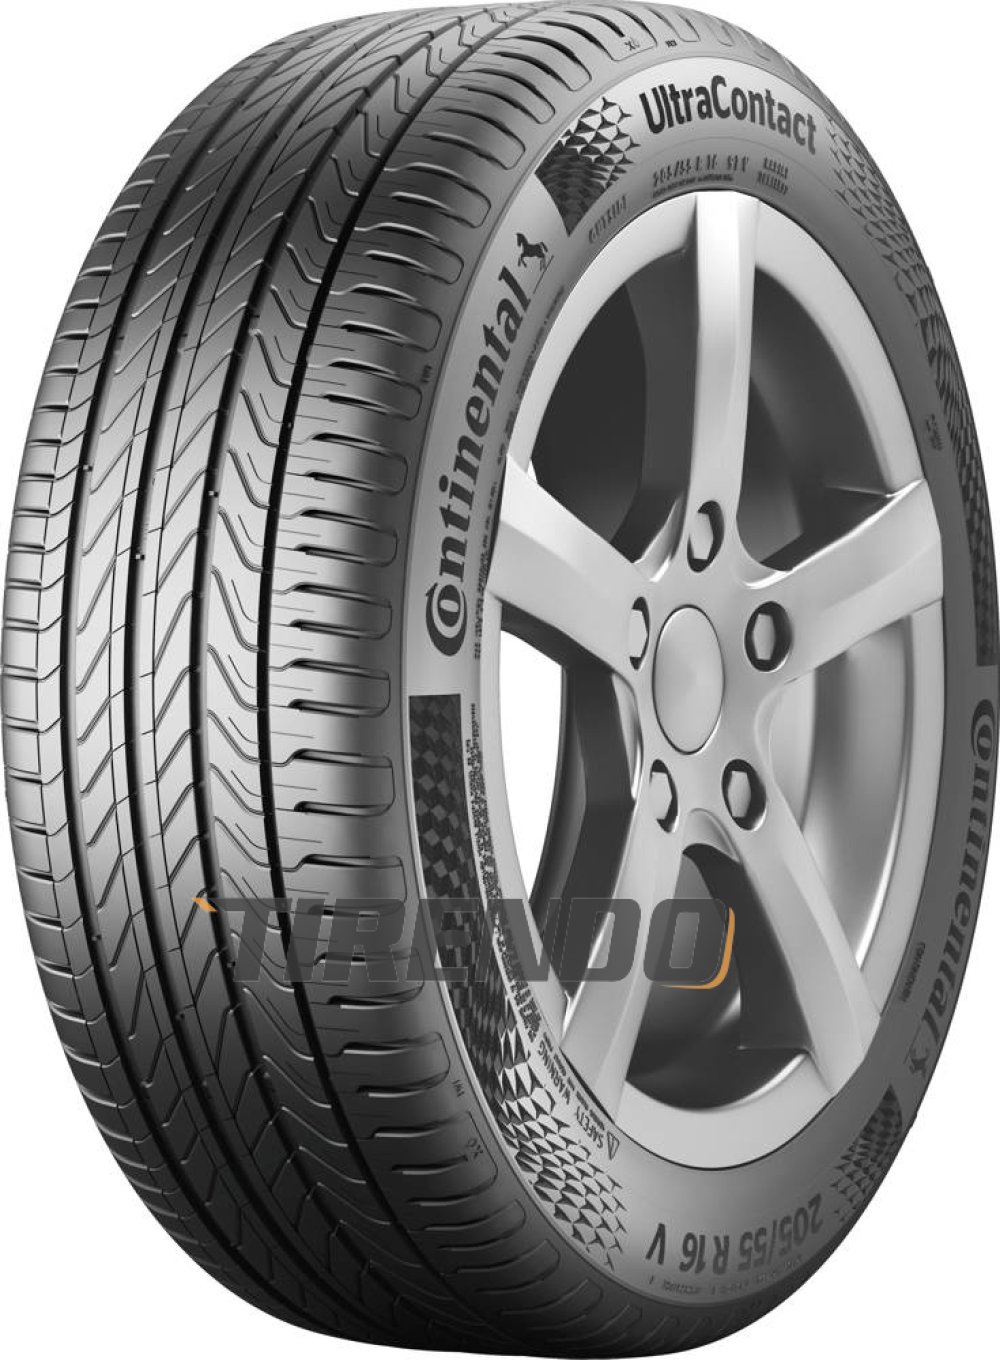 Image of Continental UltraContact ( 225/45 R17 94W XL EVc )